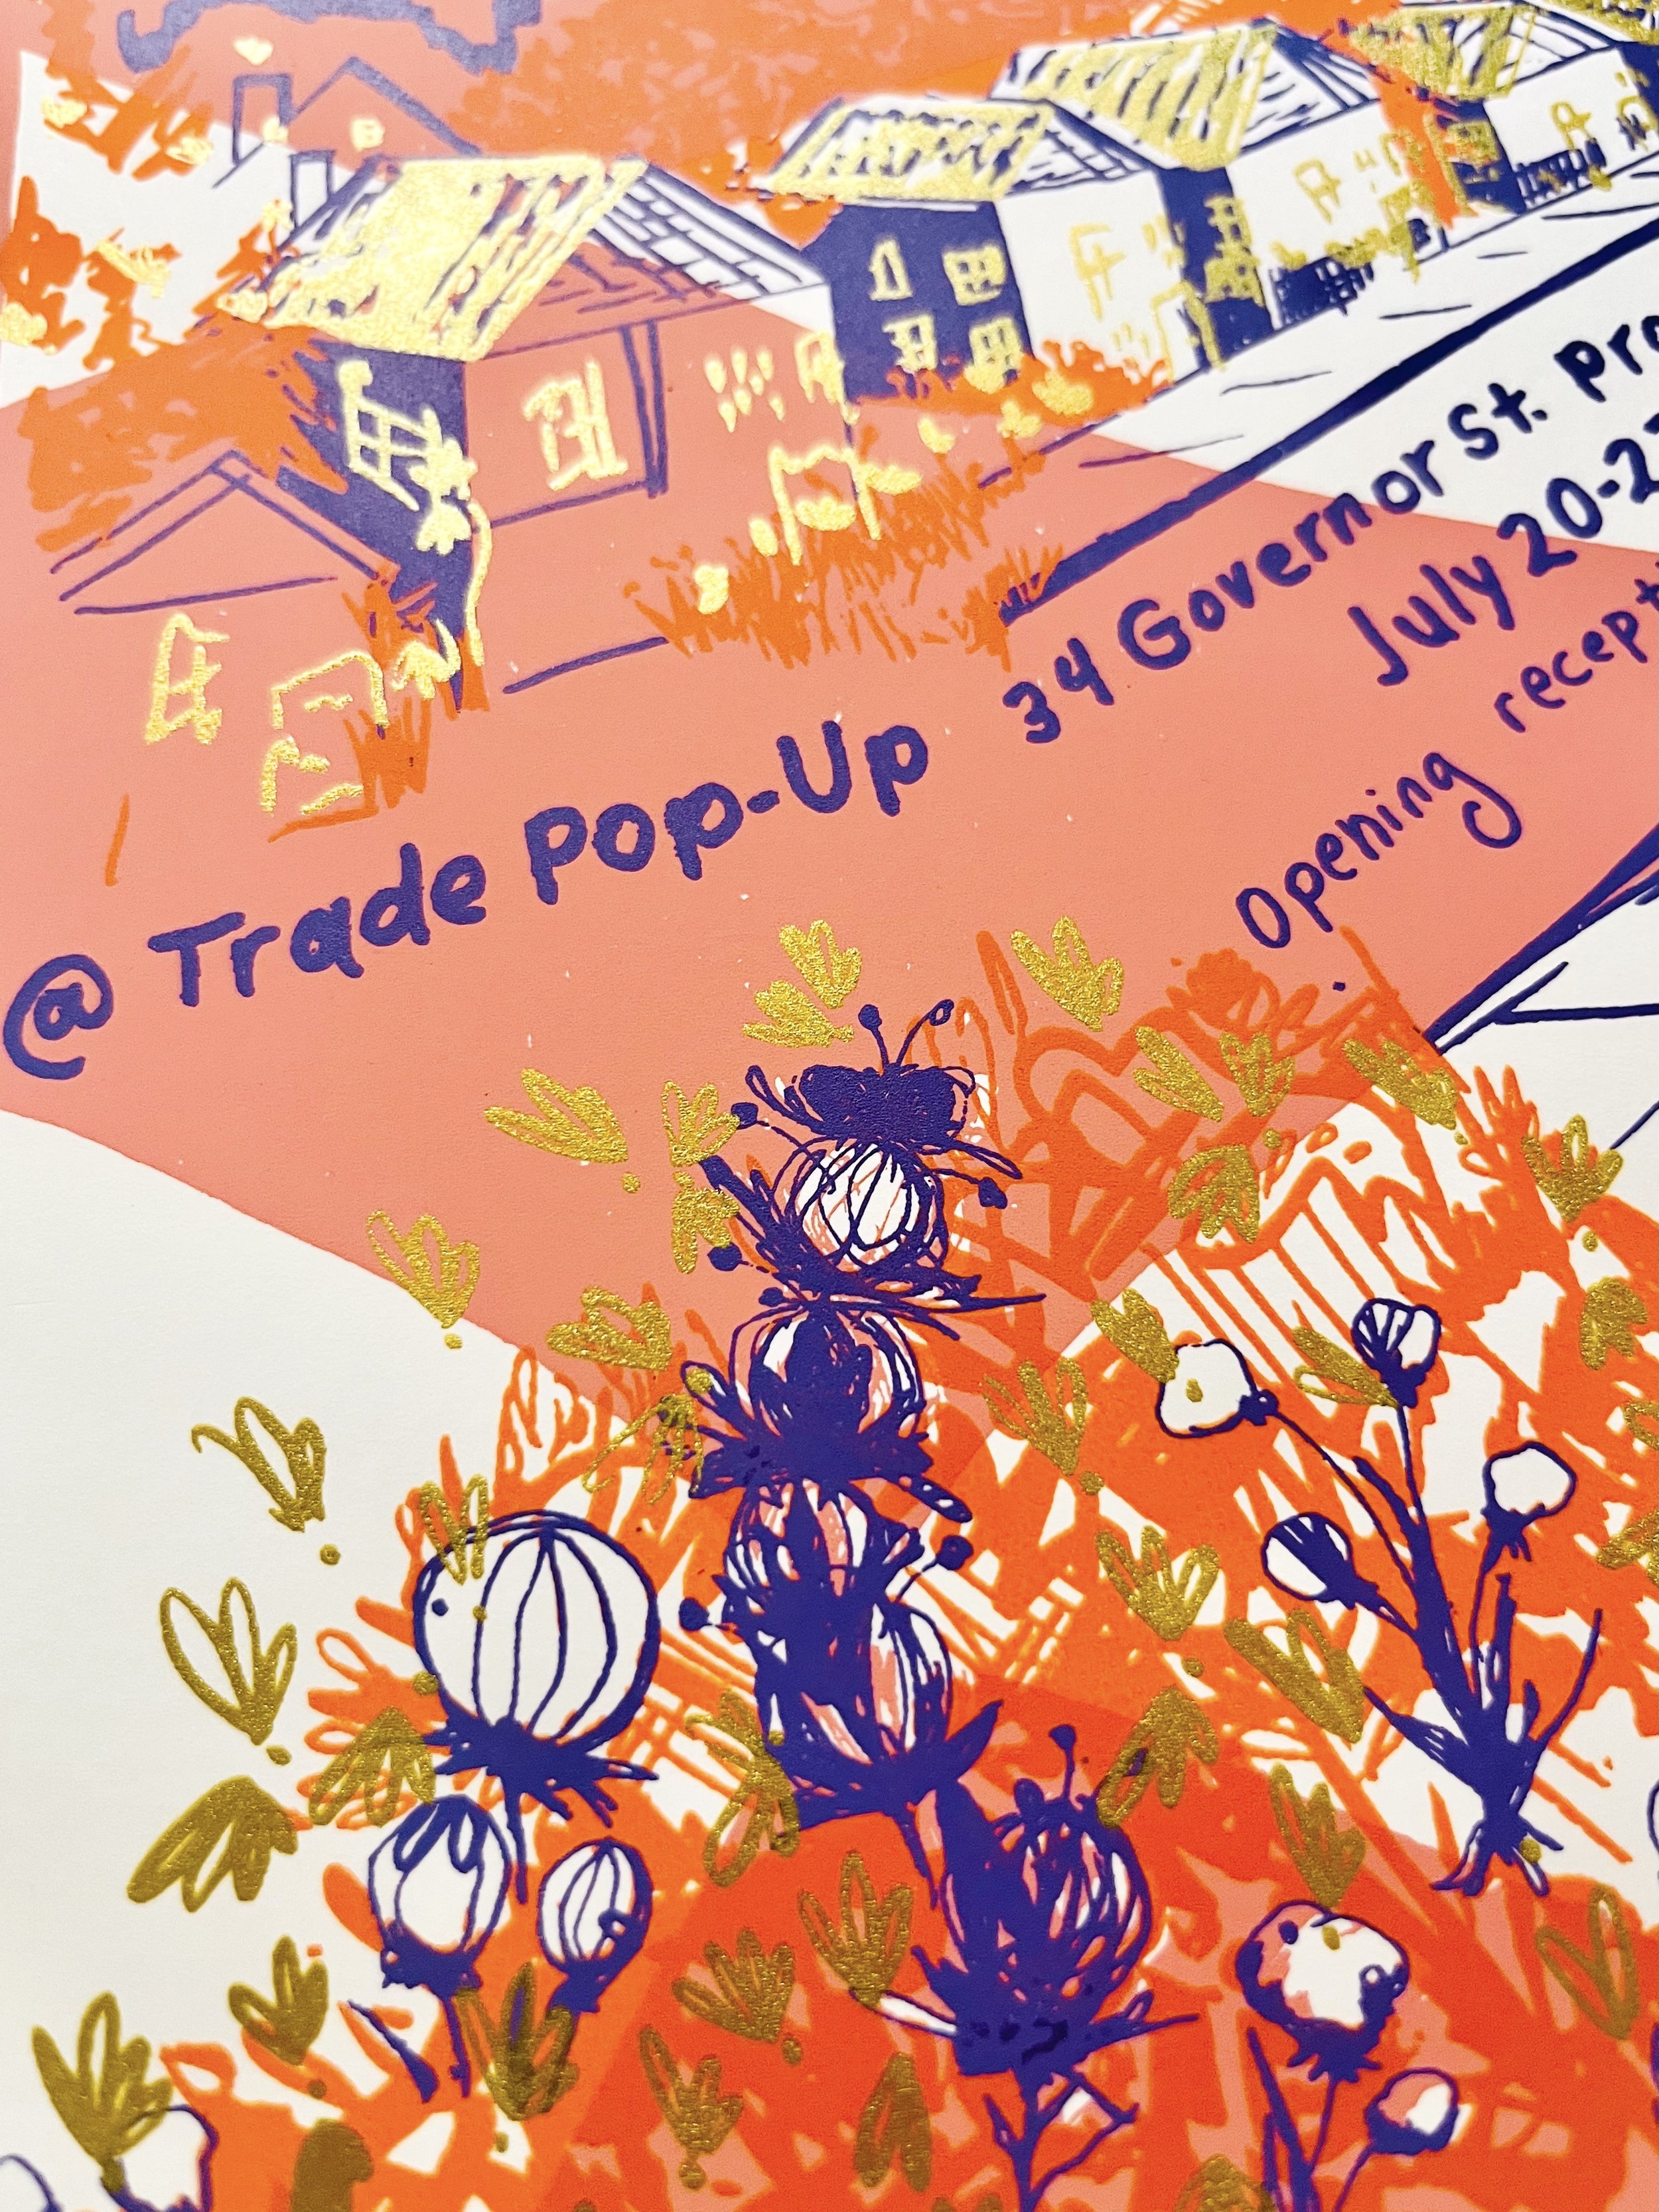  We are here, holding nothing down, but trying simply to hold it together. We would like you all to come and experience the work with us.   @ Trade Pop-Up    